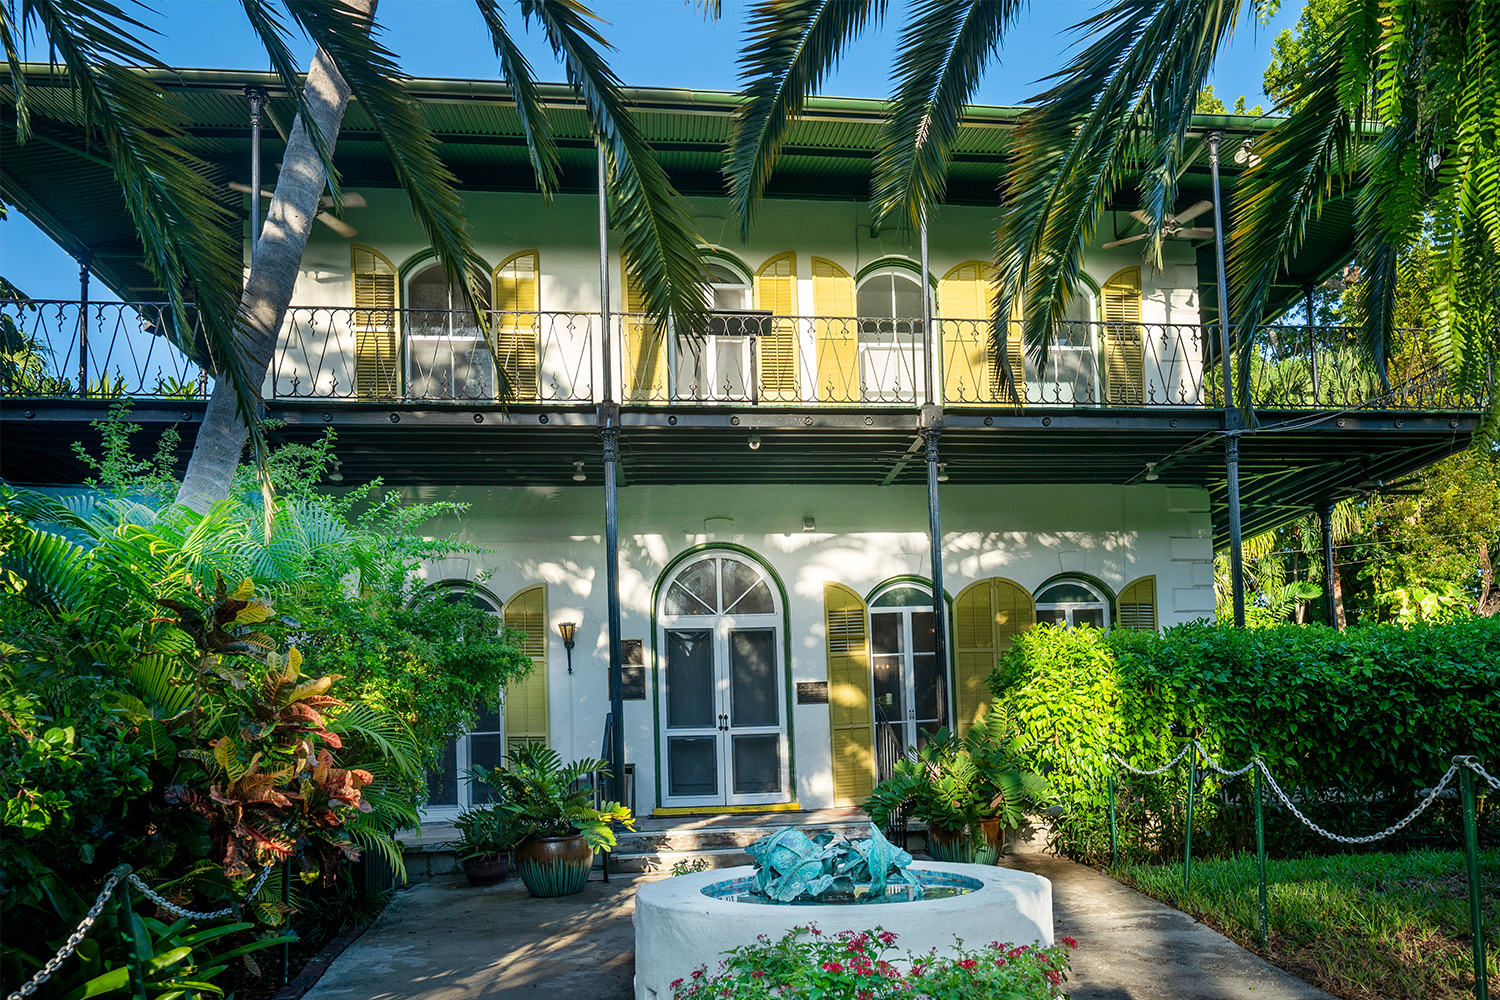 Hemingway's Key West house, from the front.